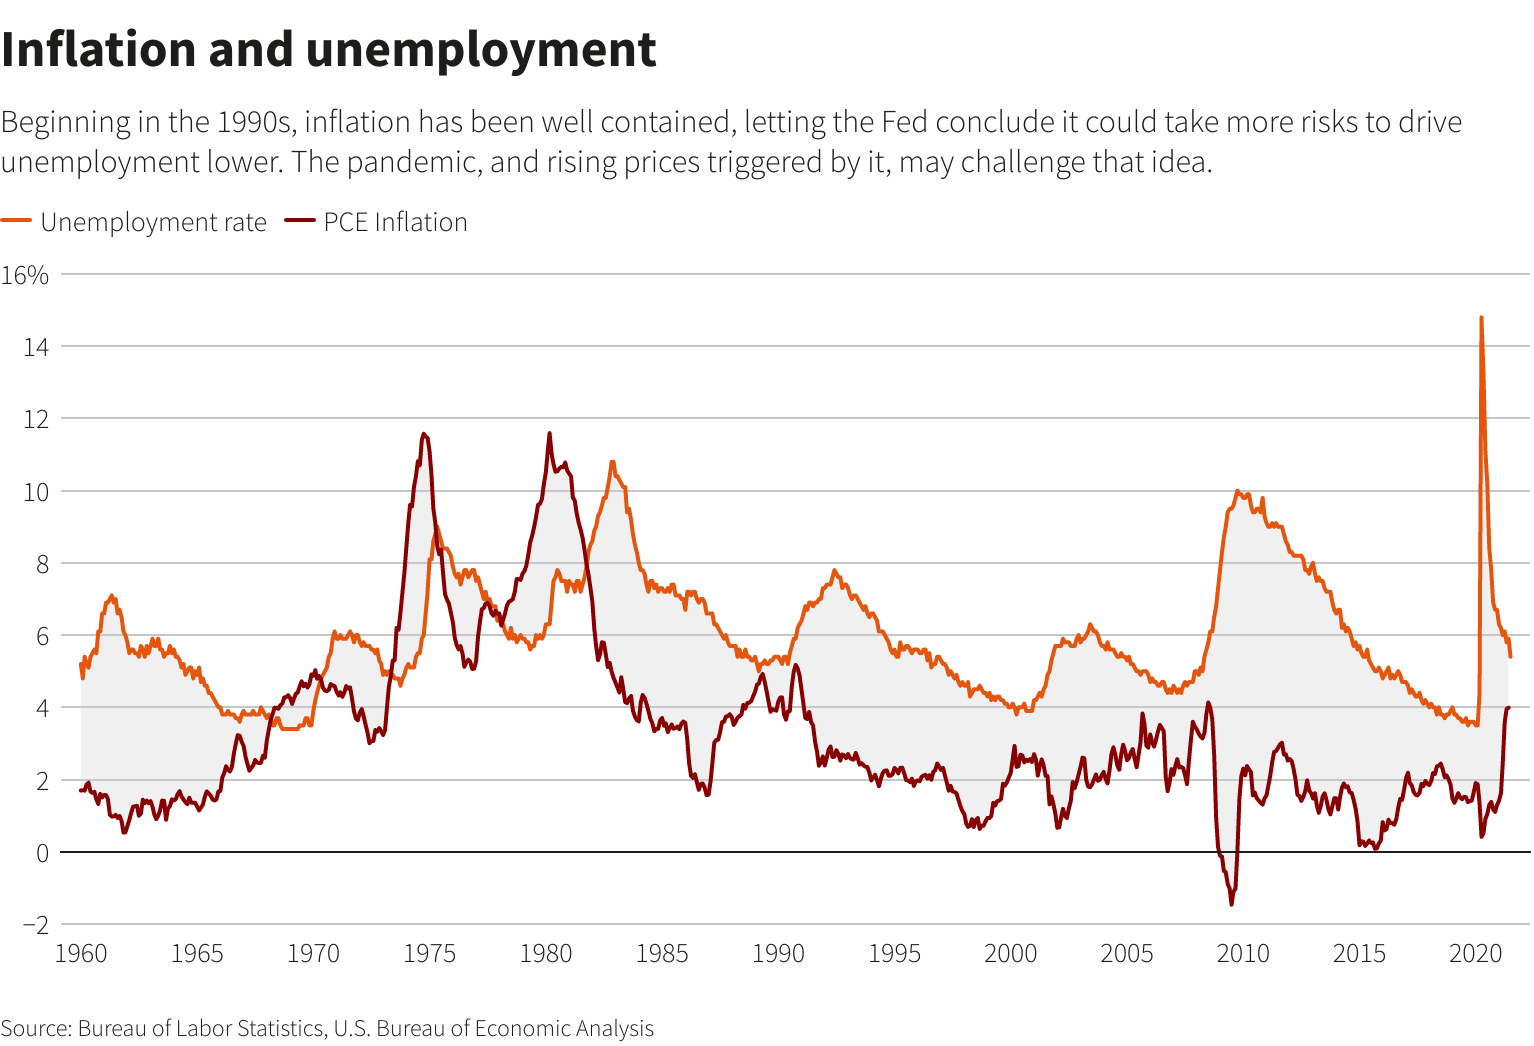 Inflation and unemployment